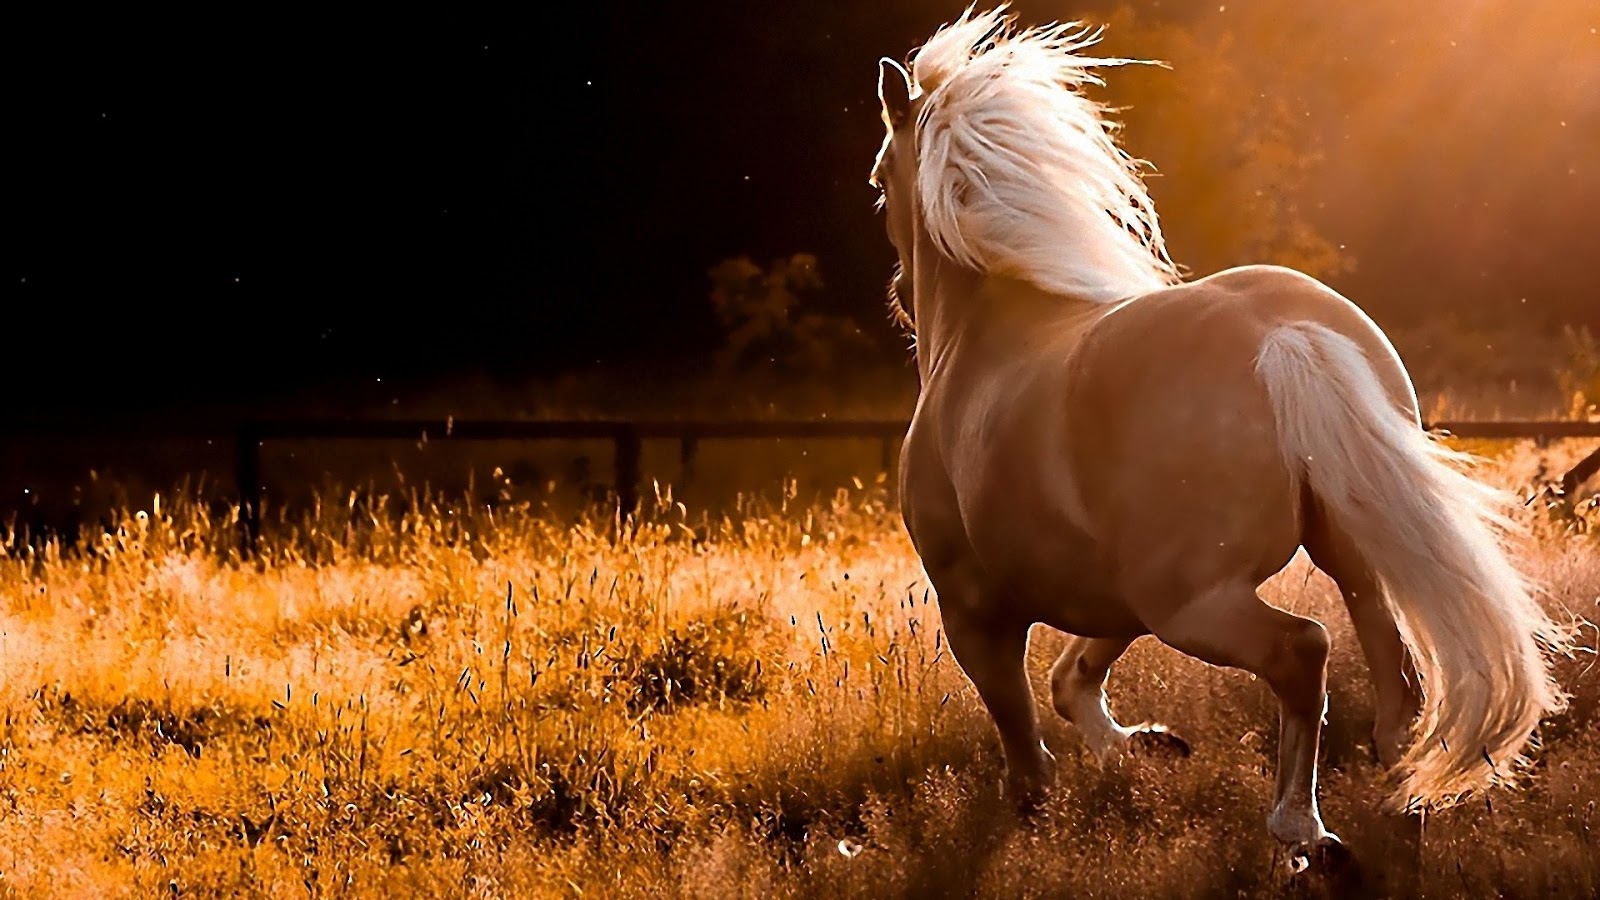 All Wallpapers Beautiful Horse Hd Wallpapers 2013